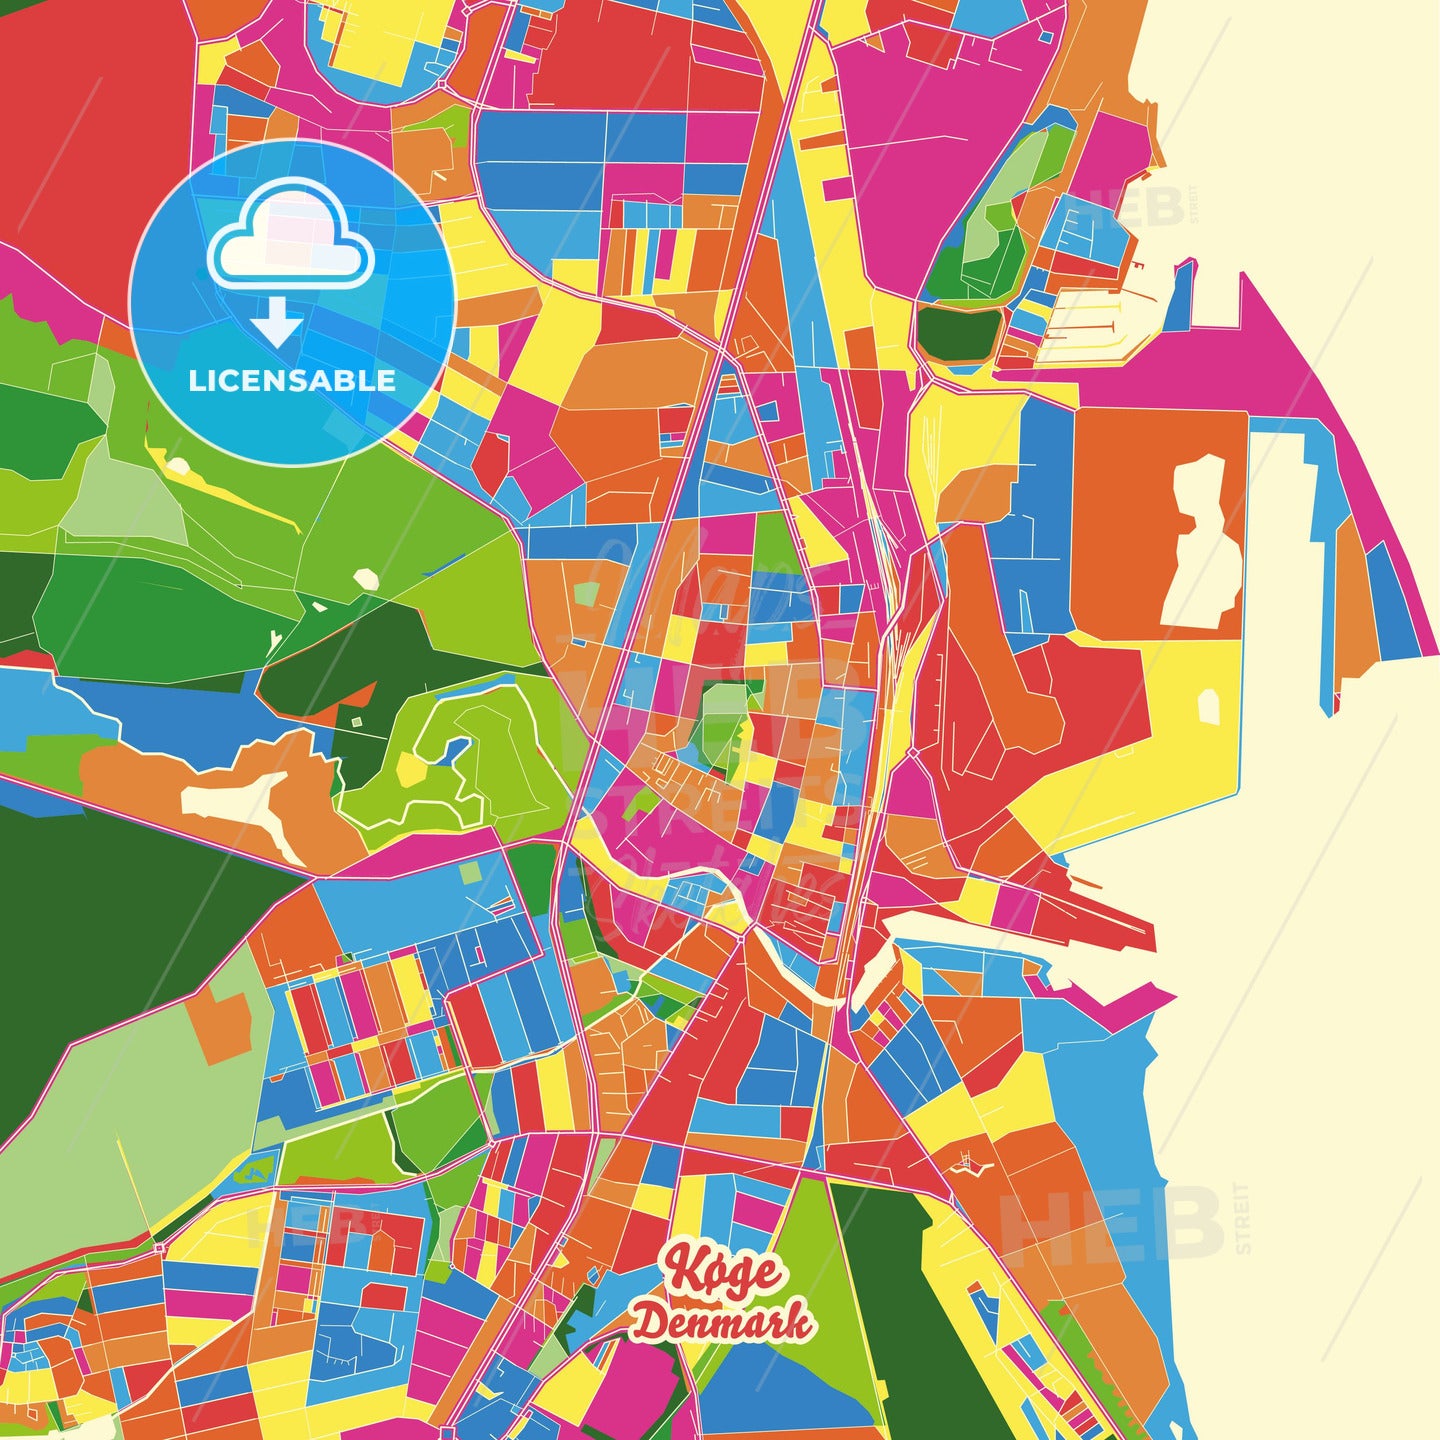 Køge, Denmark Crazy Colorful Street Map Poster Template - HEBSTREITS Sketches